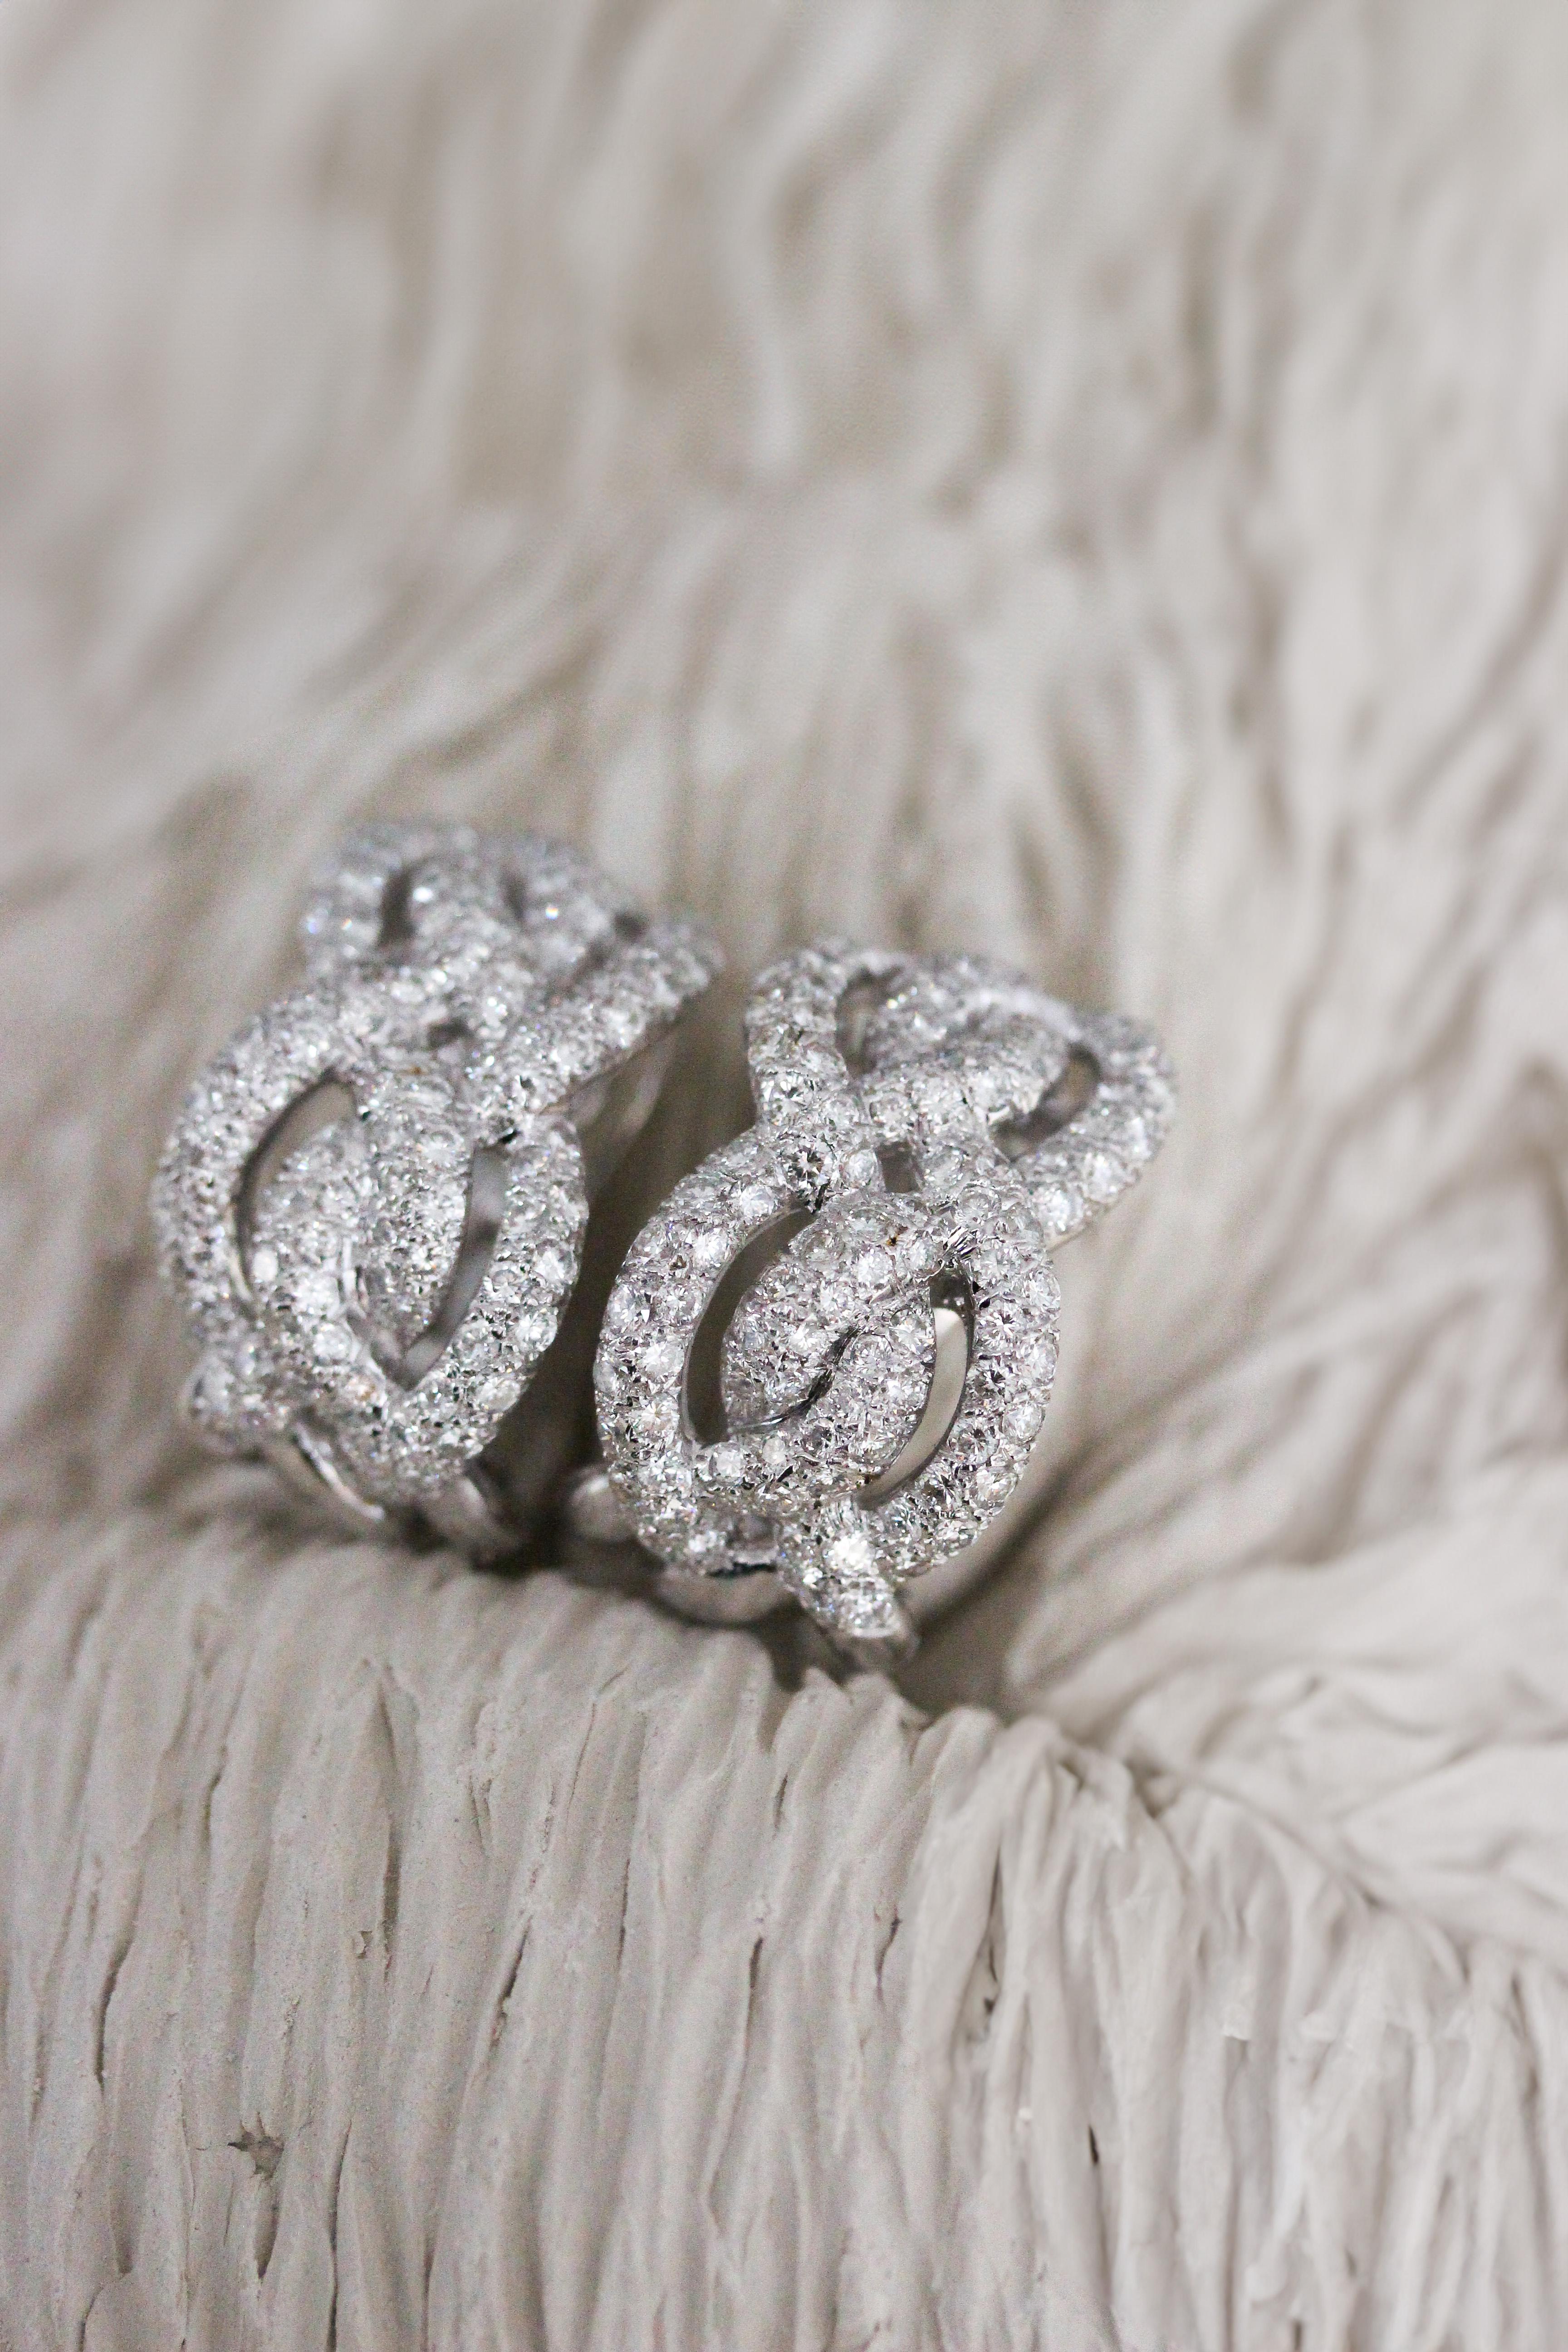 Smyrne Earrings by Mathon Paris at Second Petale Gallery

Add a touch of light to your style with the Smyrne earrings in white gold and diamonds.
 
About the Gemstones :
212 Diamonds : 3,92 ct

ABOUT the CREATOR
MATHON PARIS : FRENCH STYLE SINCE